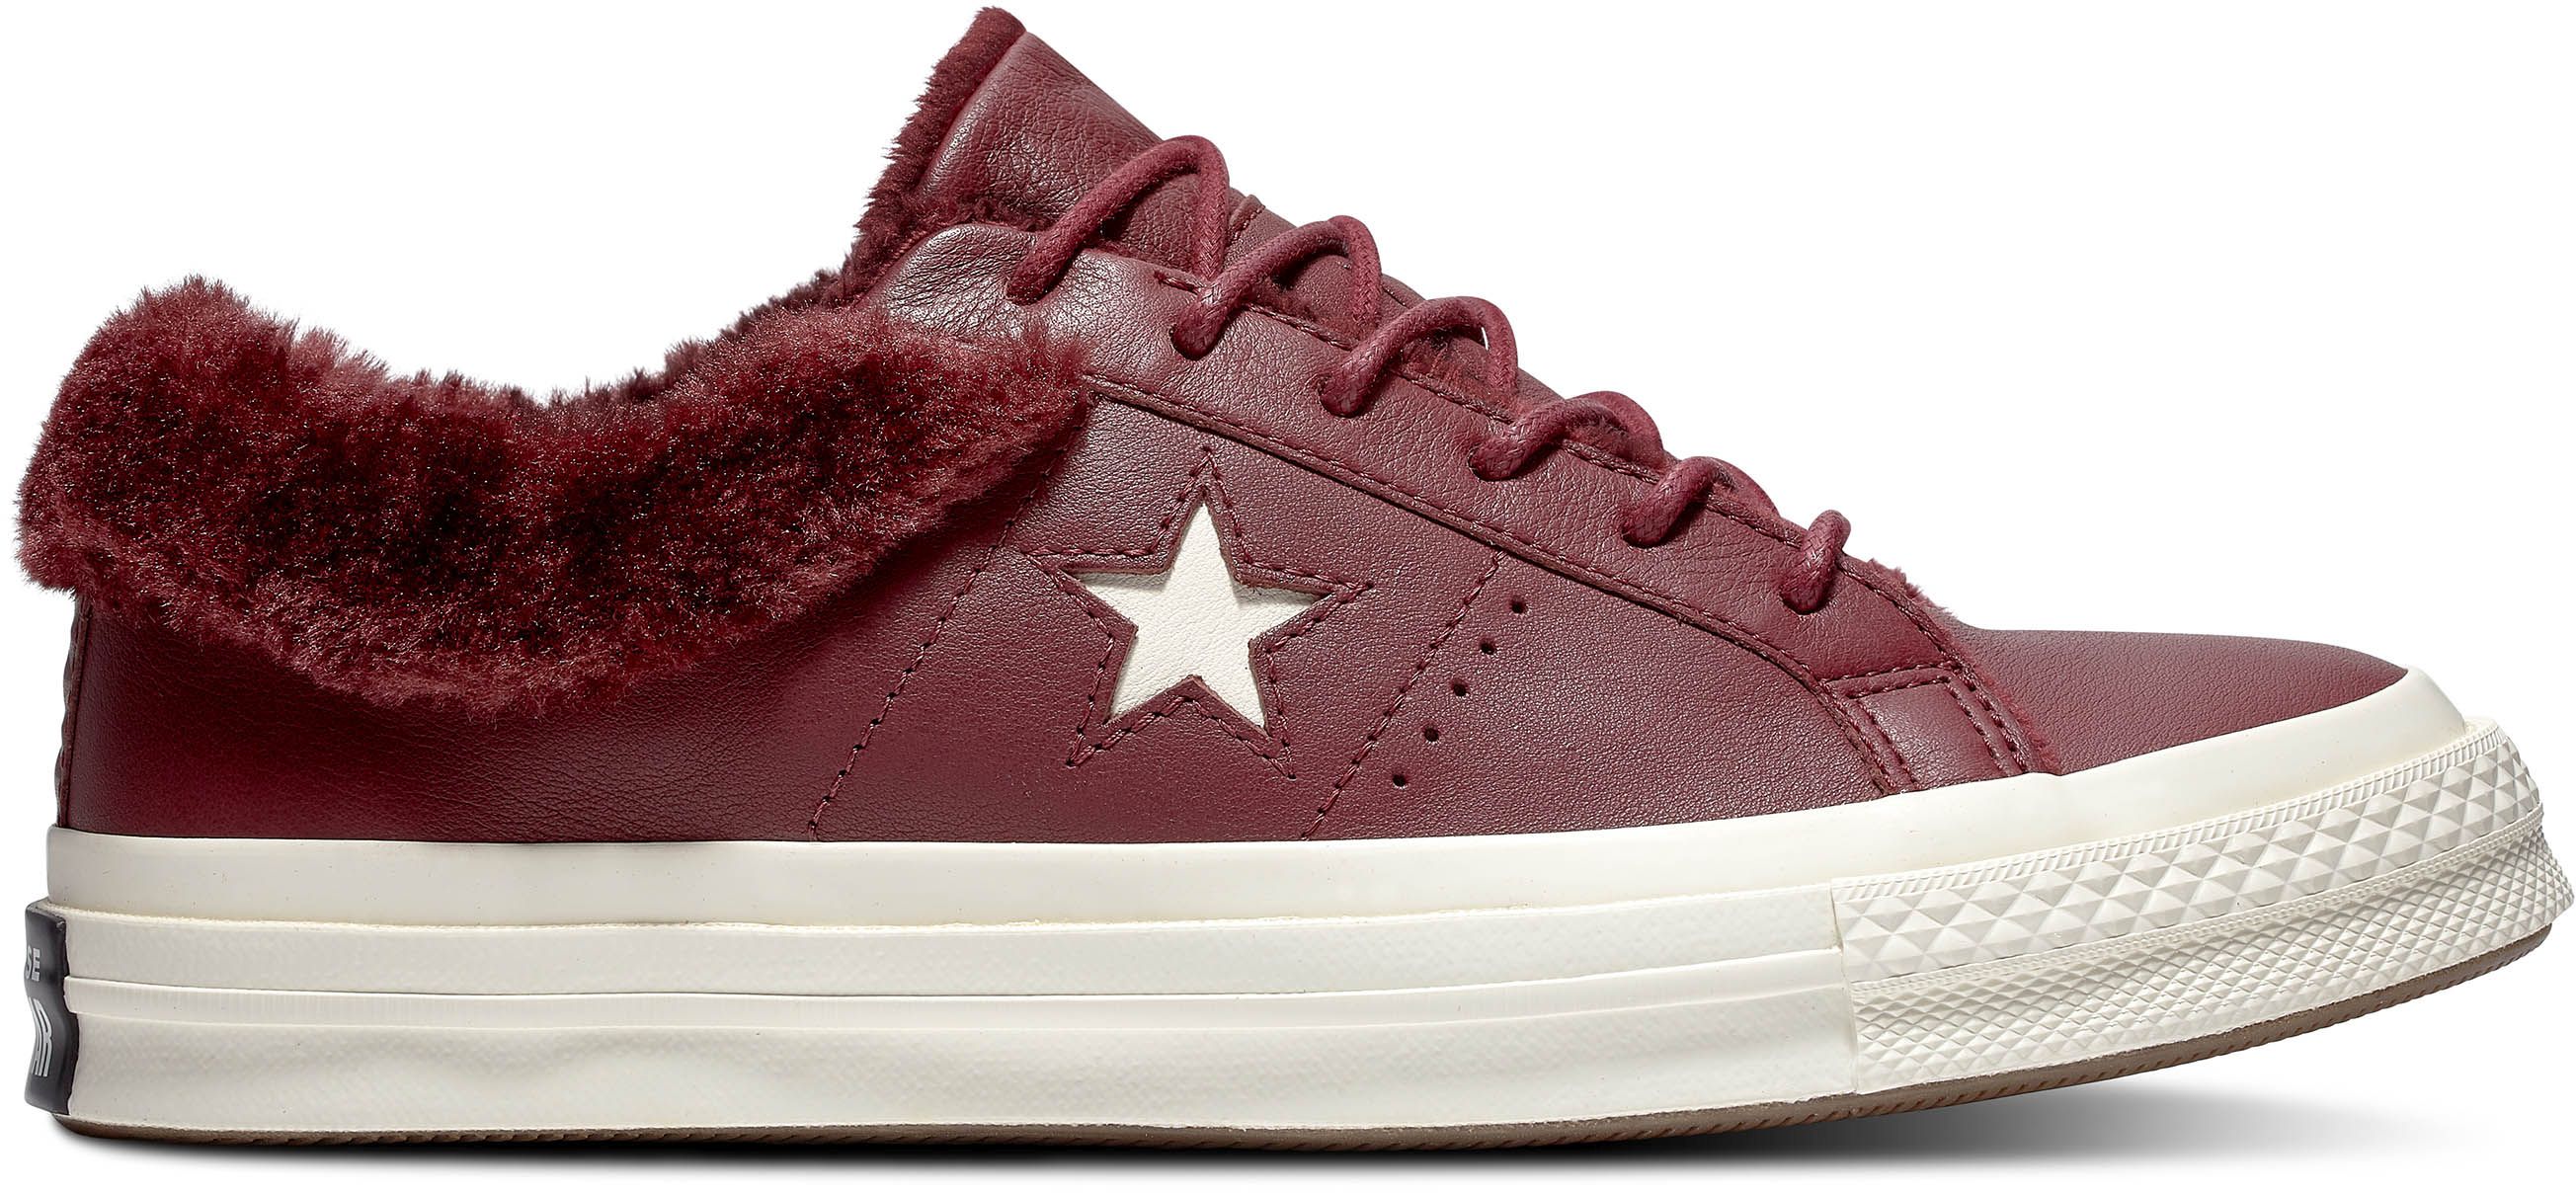 converse one star sp